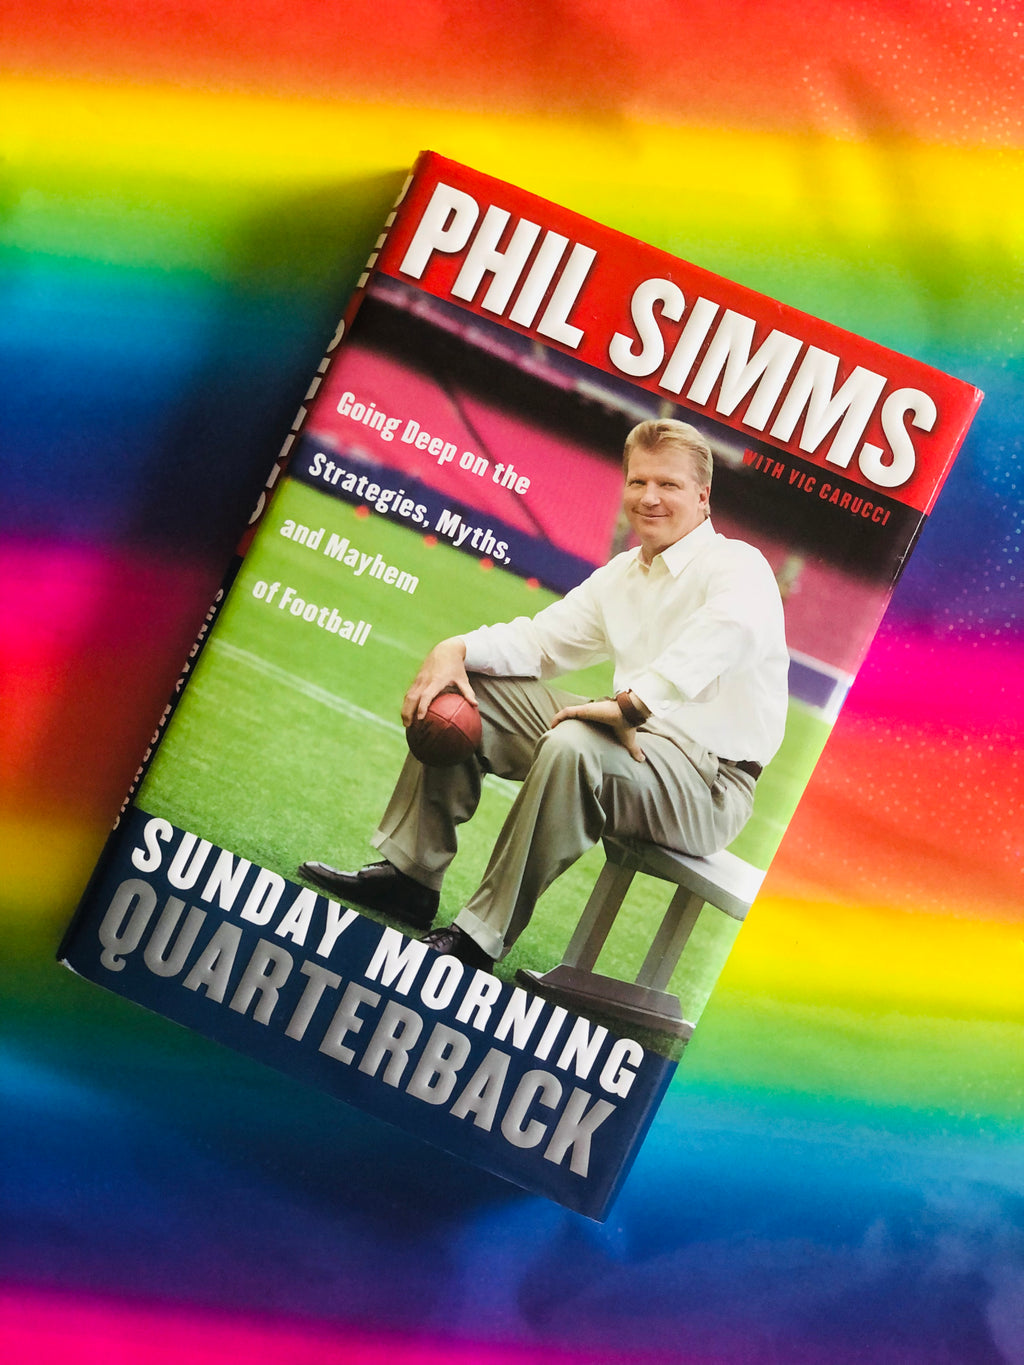 Sunday Morning Quarterback by Phil Simms